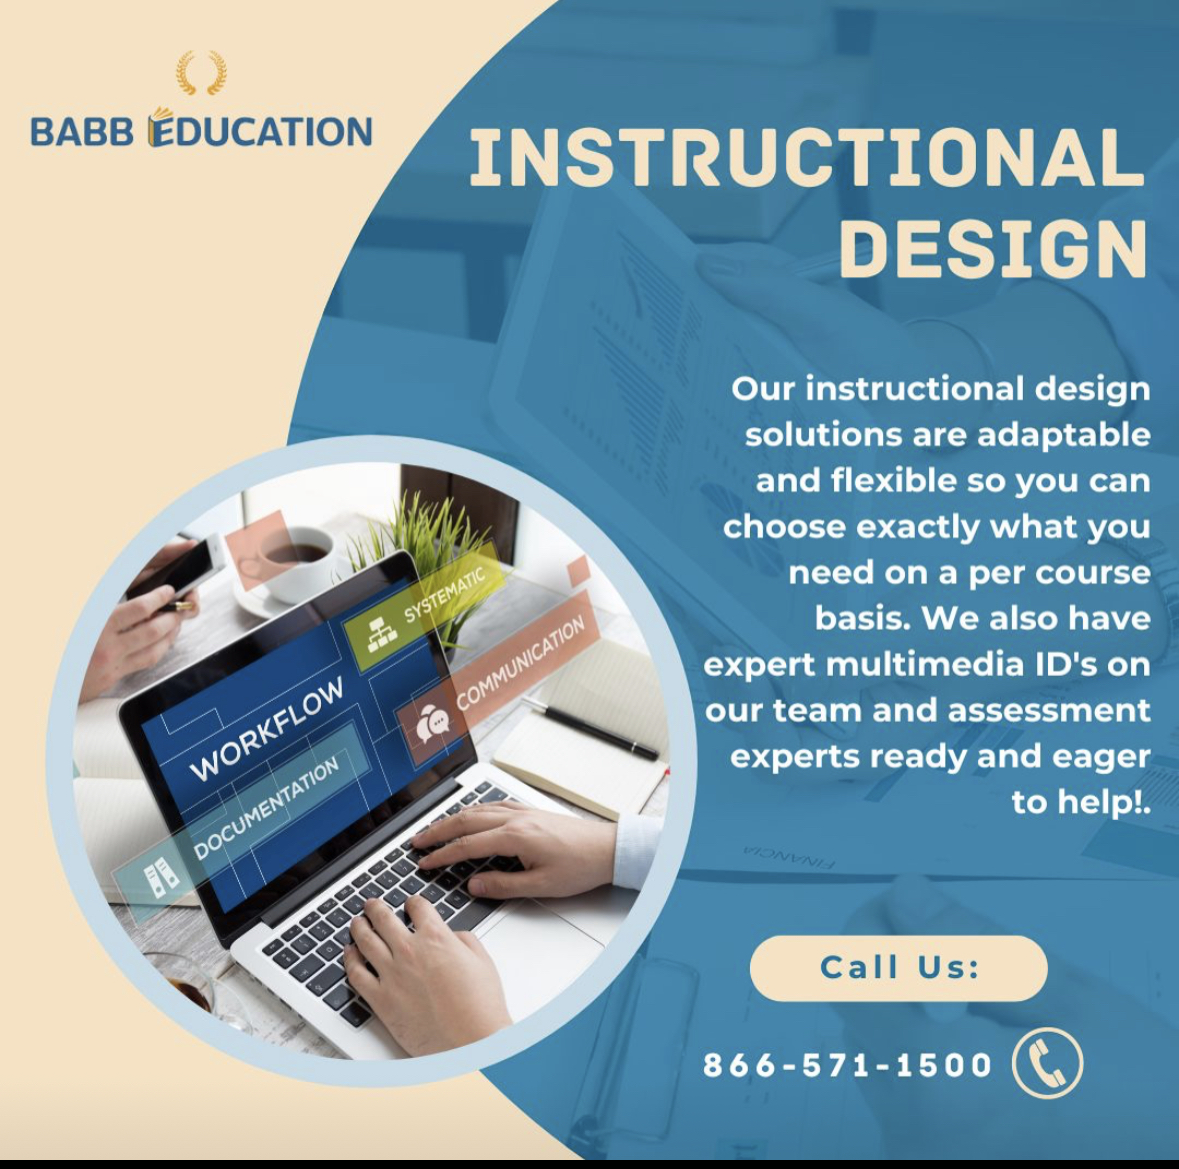 At Babb Education, we understand that every course you want to bring to market has its unique requirements.

Learn more: babbeducation.com/?utm_campaign=…

#InstructionalDesign #AdaptiveApproach #EnhancedLearning
#BabbEducation
#HigherLearning
#HigherEducation
#HigherEdLeadership